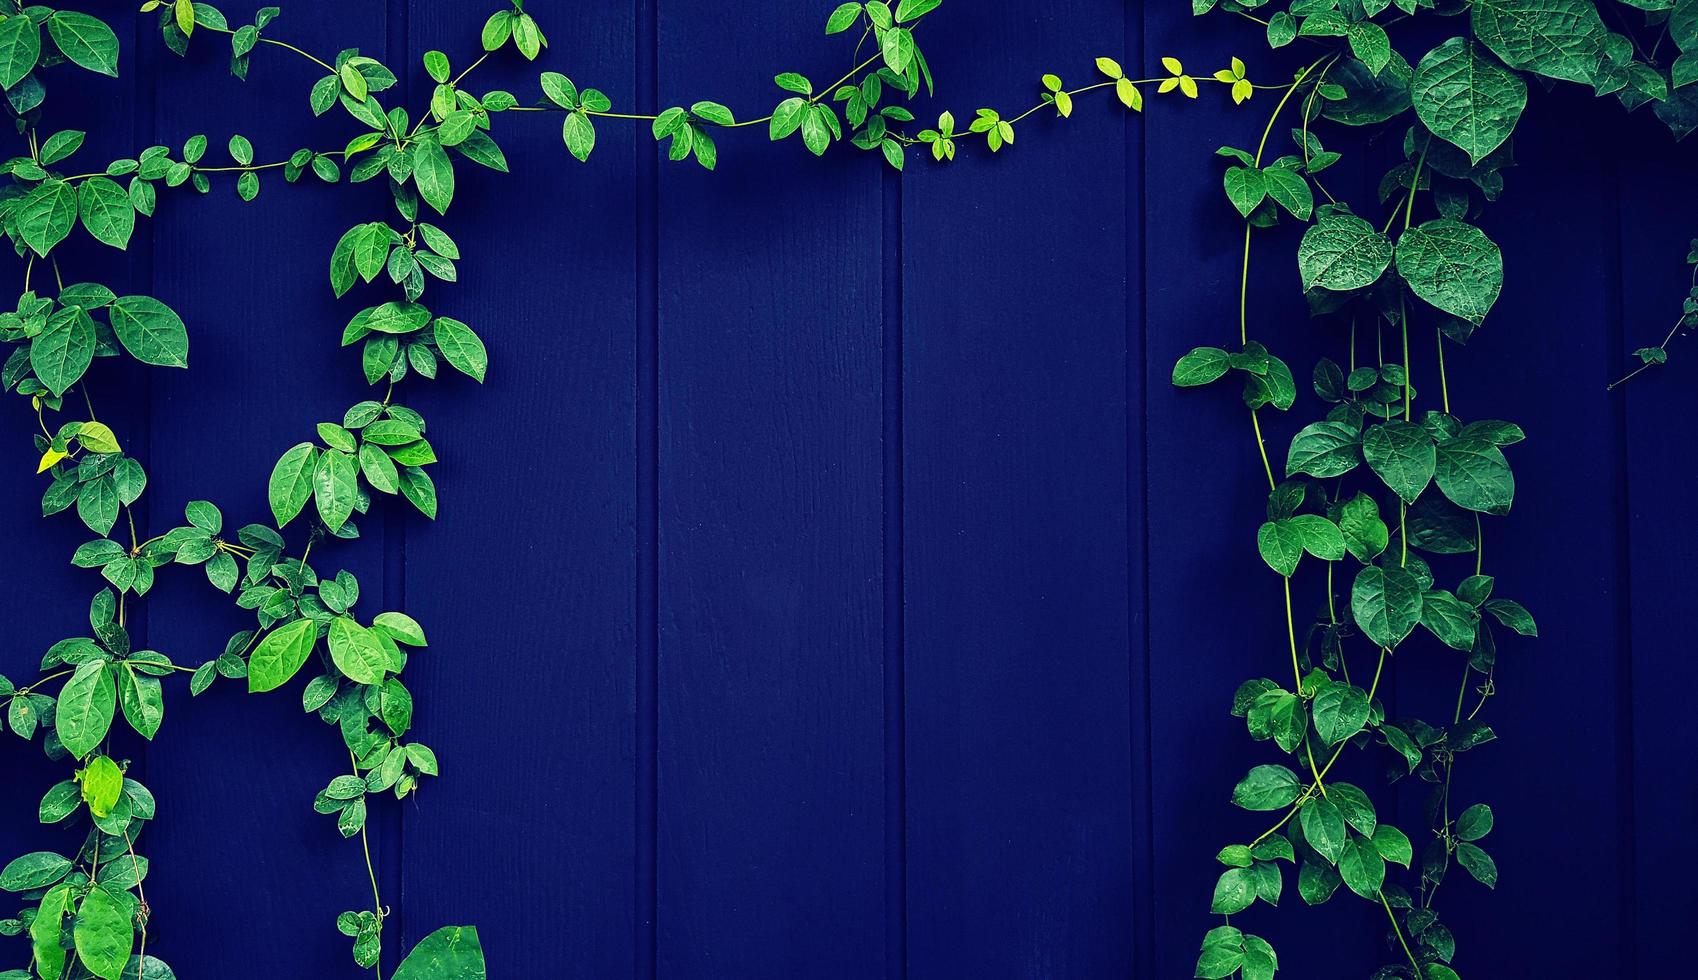 Green Vine, ivy, liana, climber or creeper plant growth on black wooden wall with copy space on center or middle. Leaves on wallpaper or background in blue vintage filter tone. Beauty in nature. photo